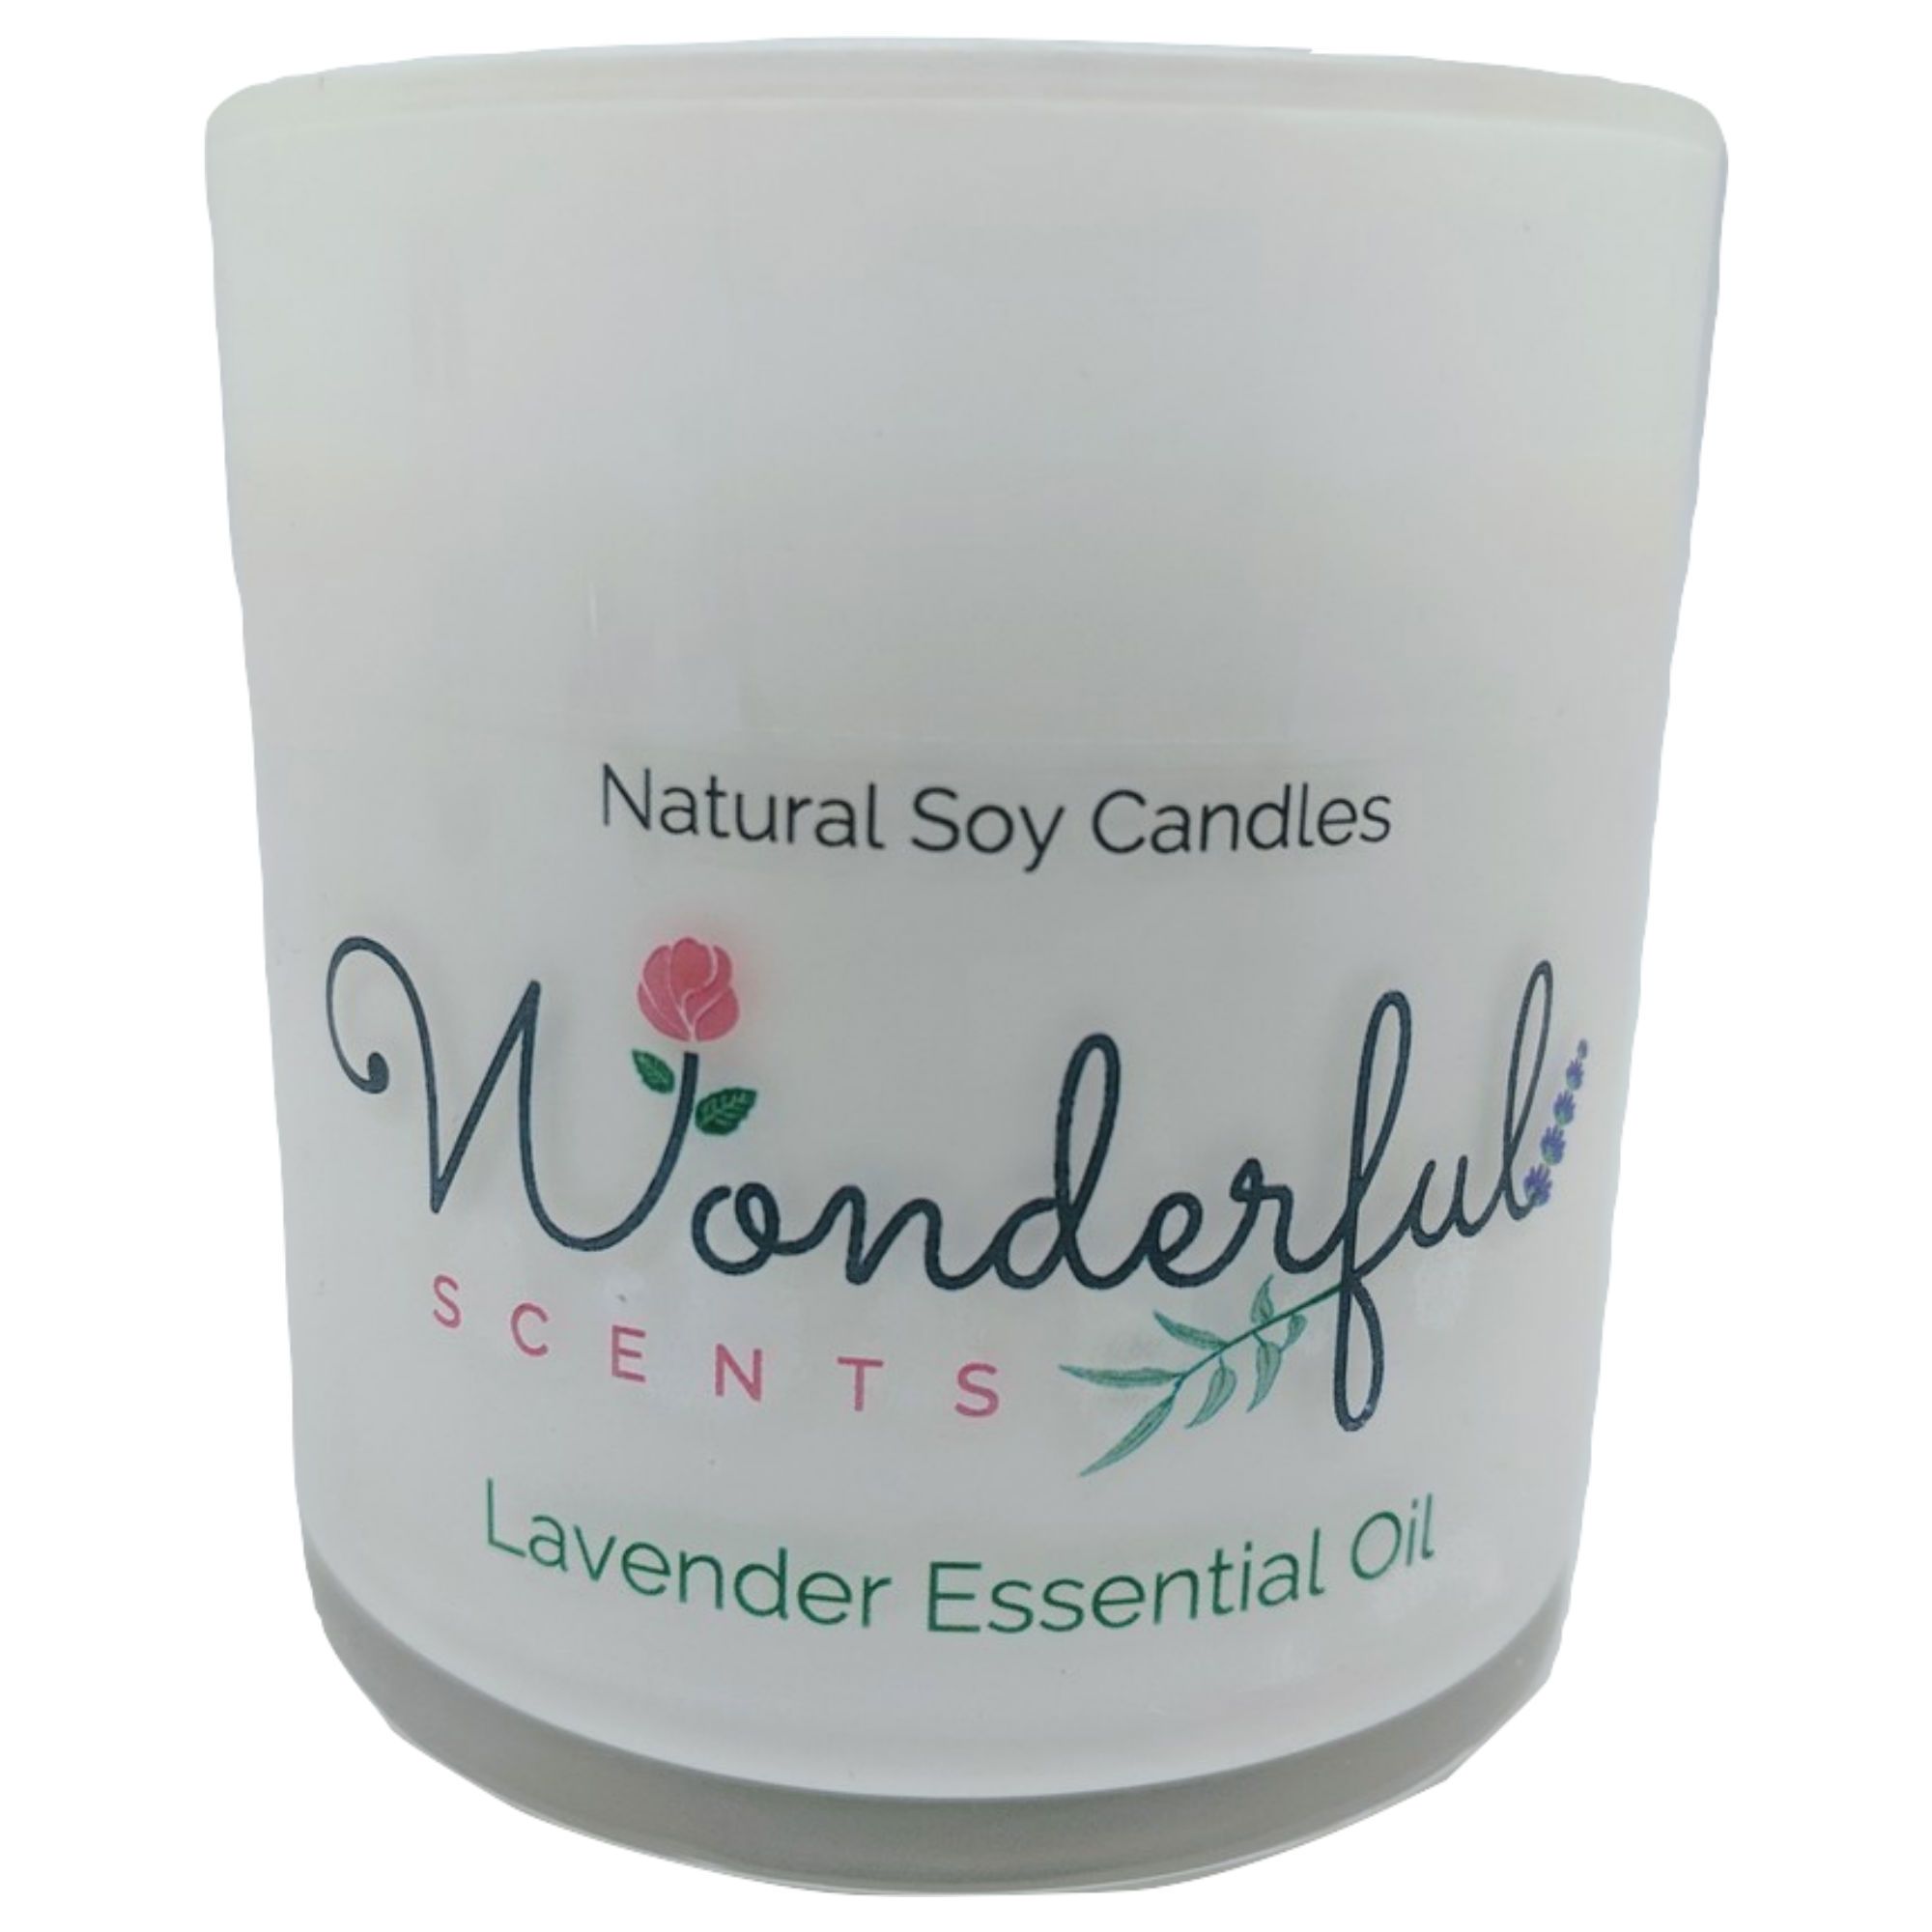 12 oz. clear tumbler natural soy wax scented candle